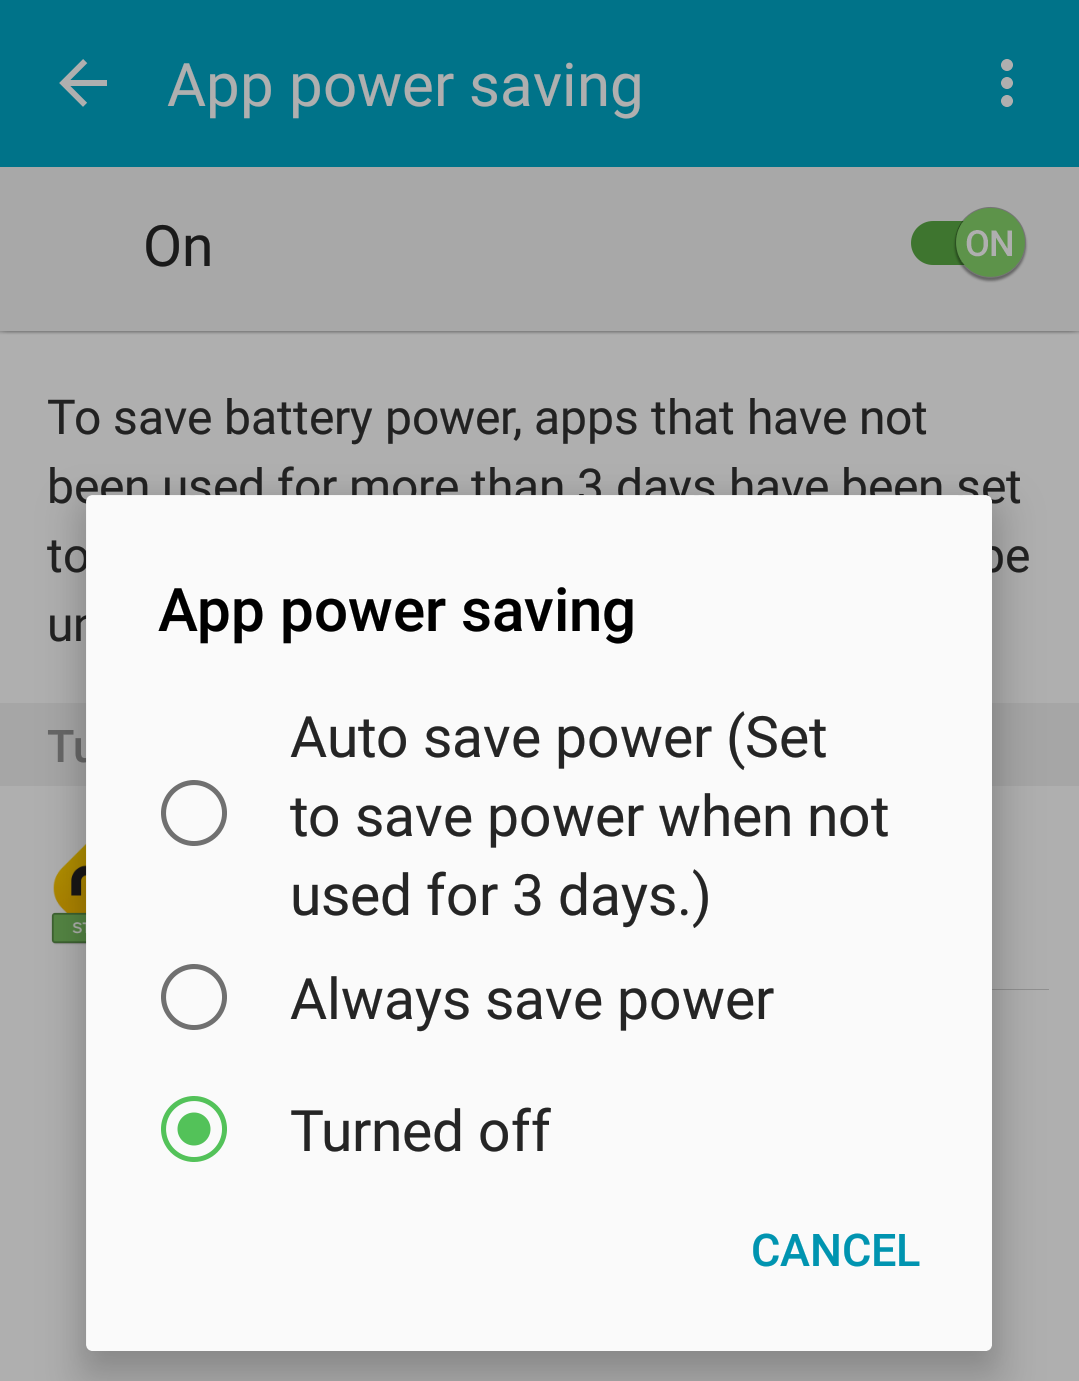 This shows the app power saving mode is turned off for MileIQ